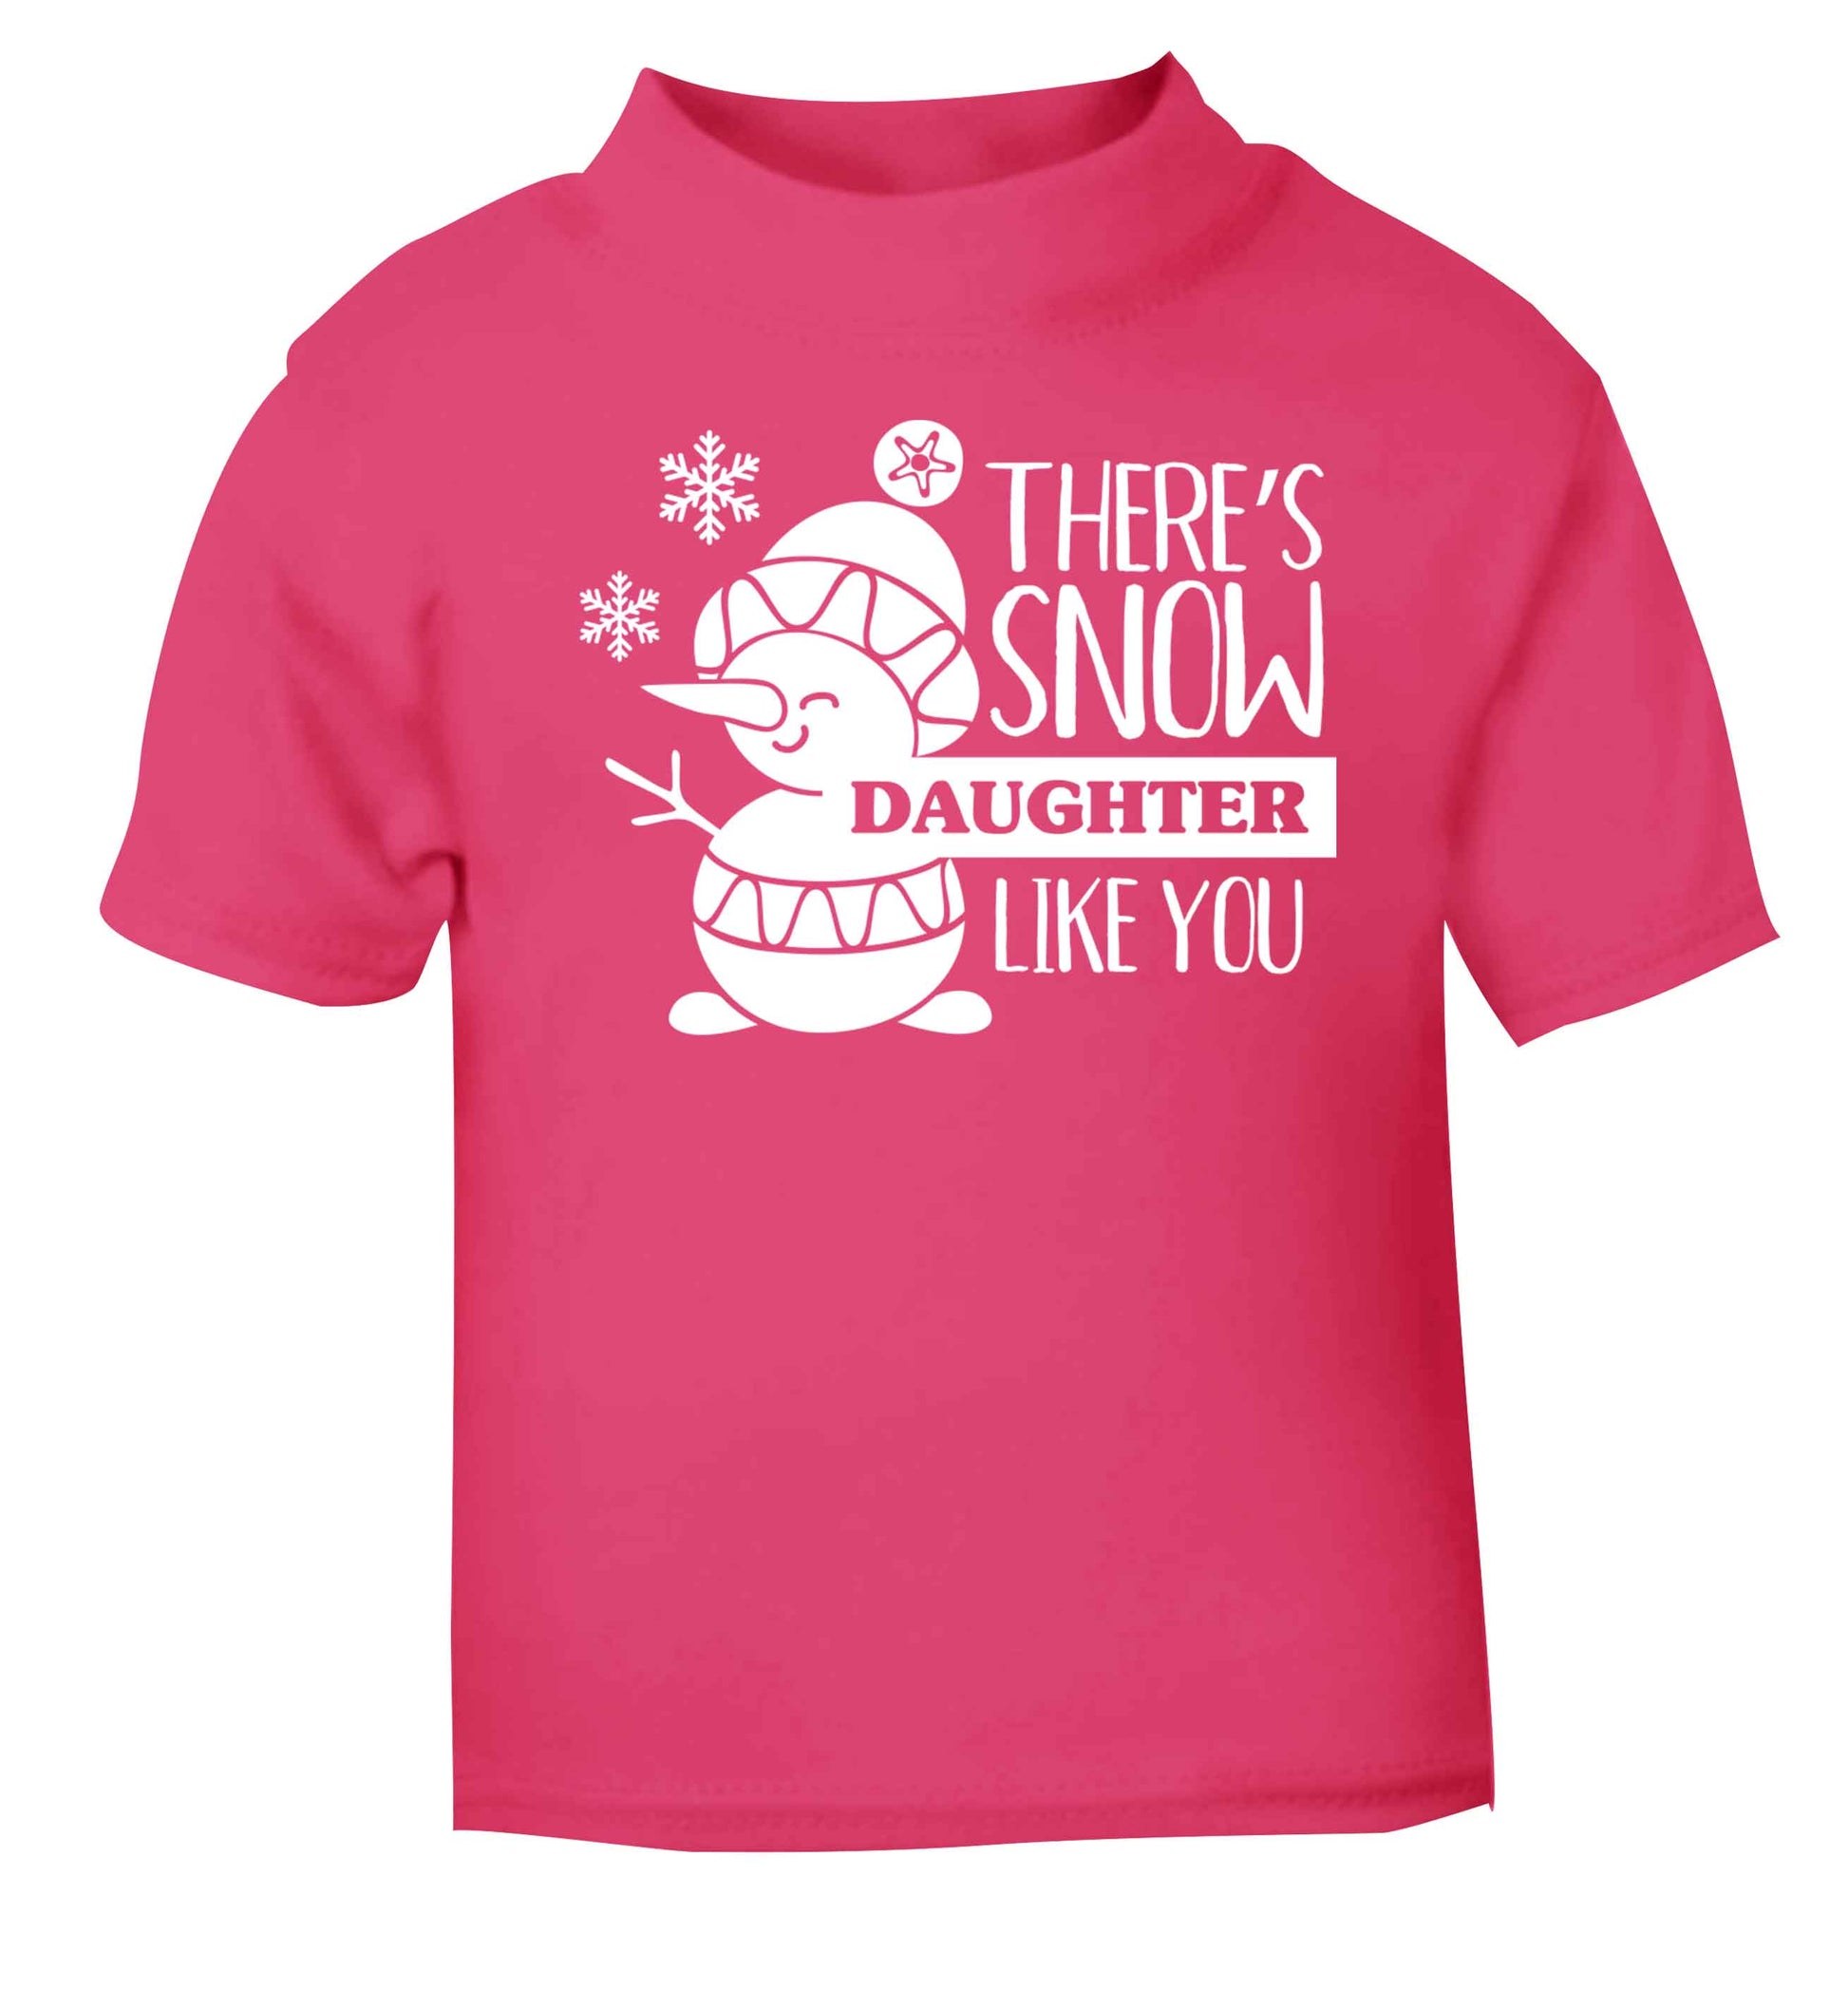 There's snow daughter like you pink baby toddler Tshirt 2 Years